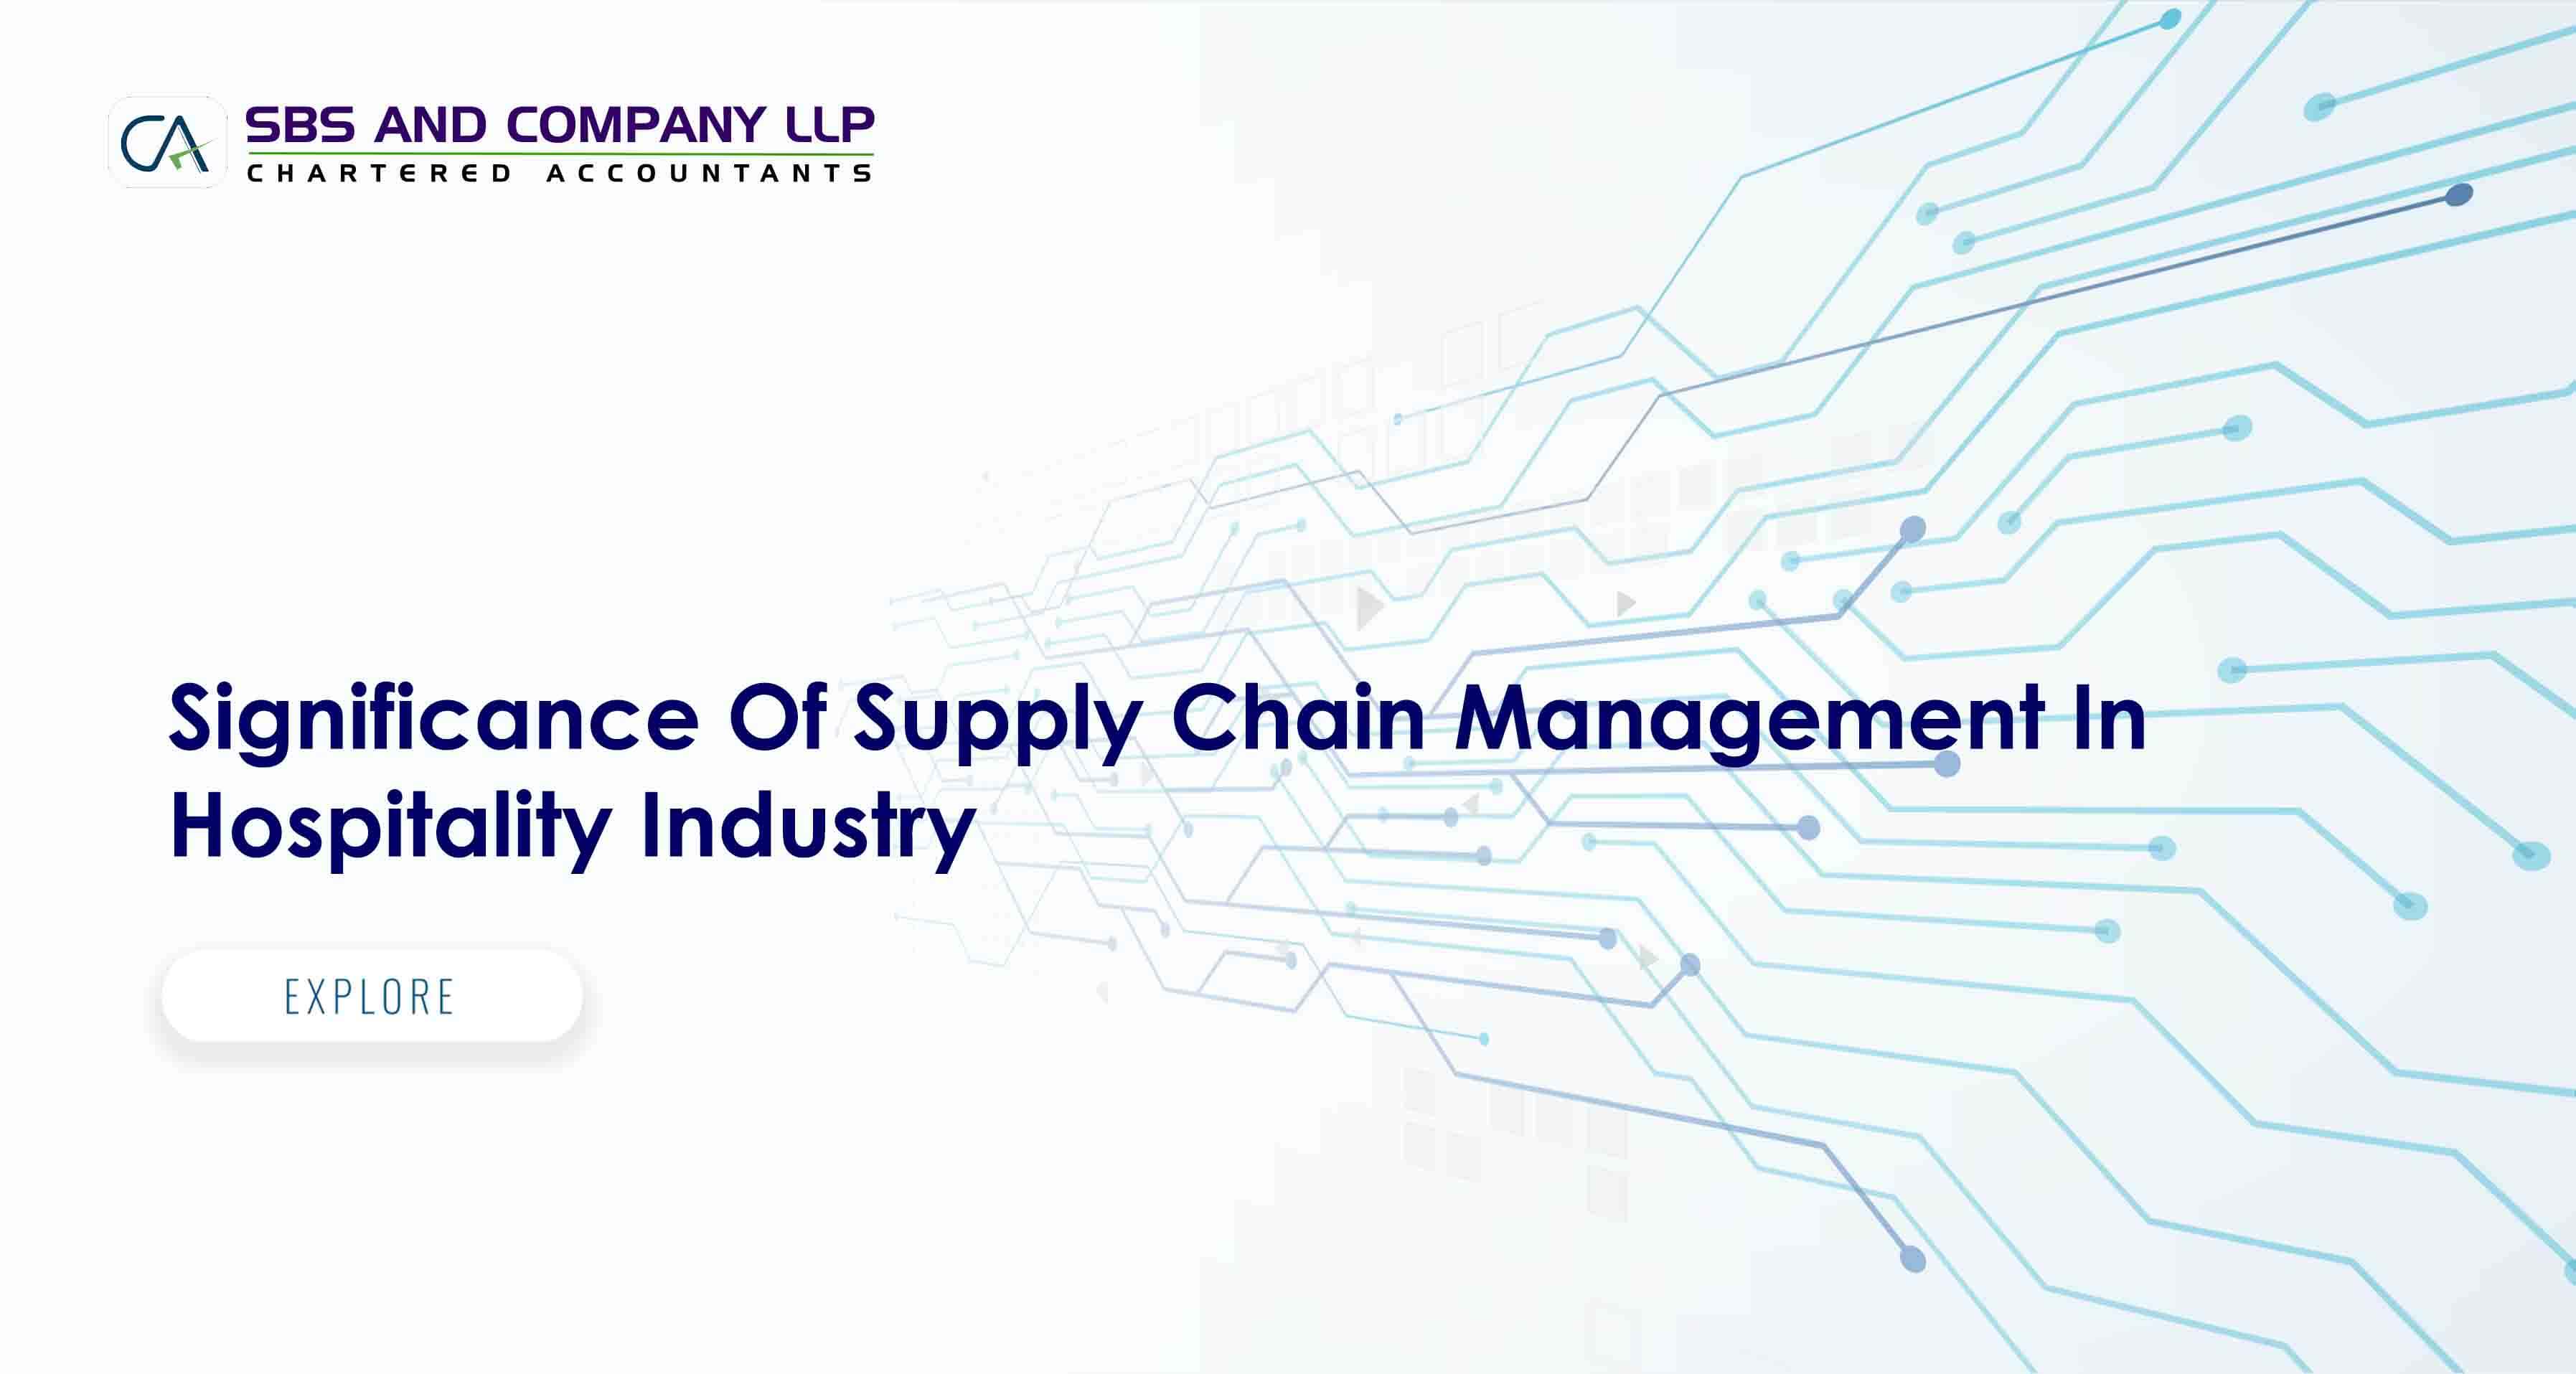 Supply Chain Management In Hospitality Industry